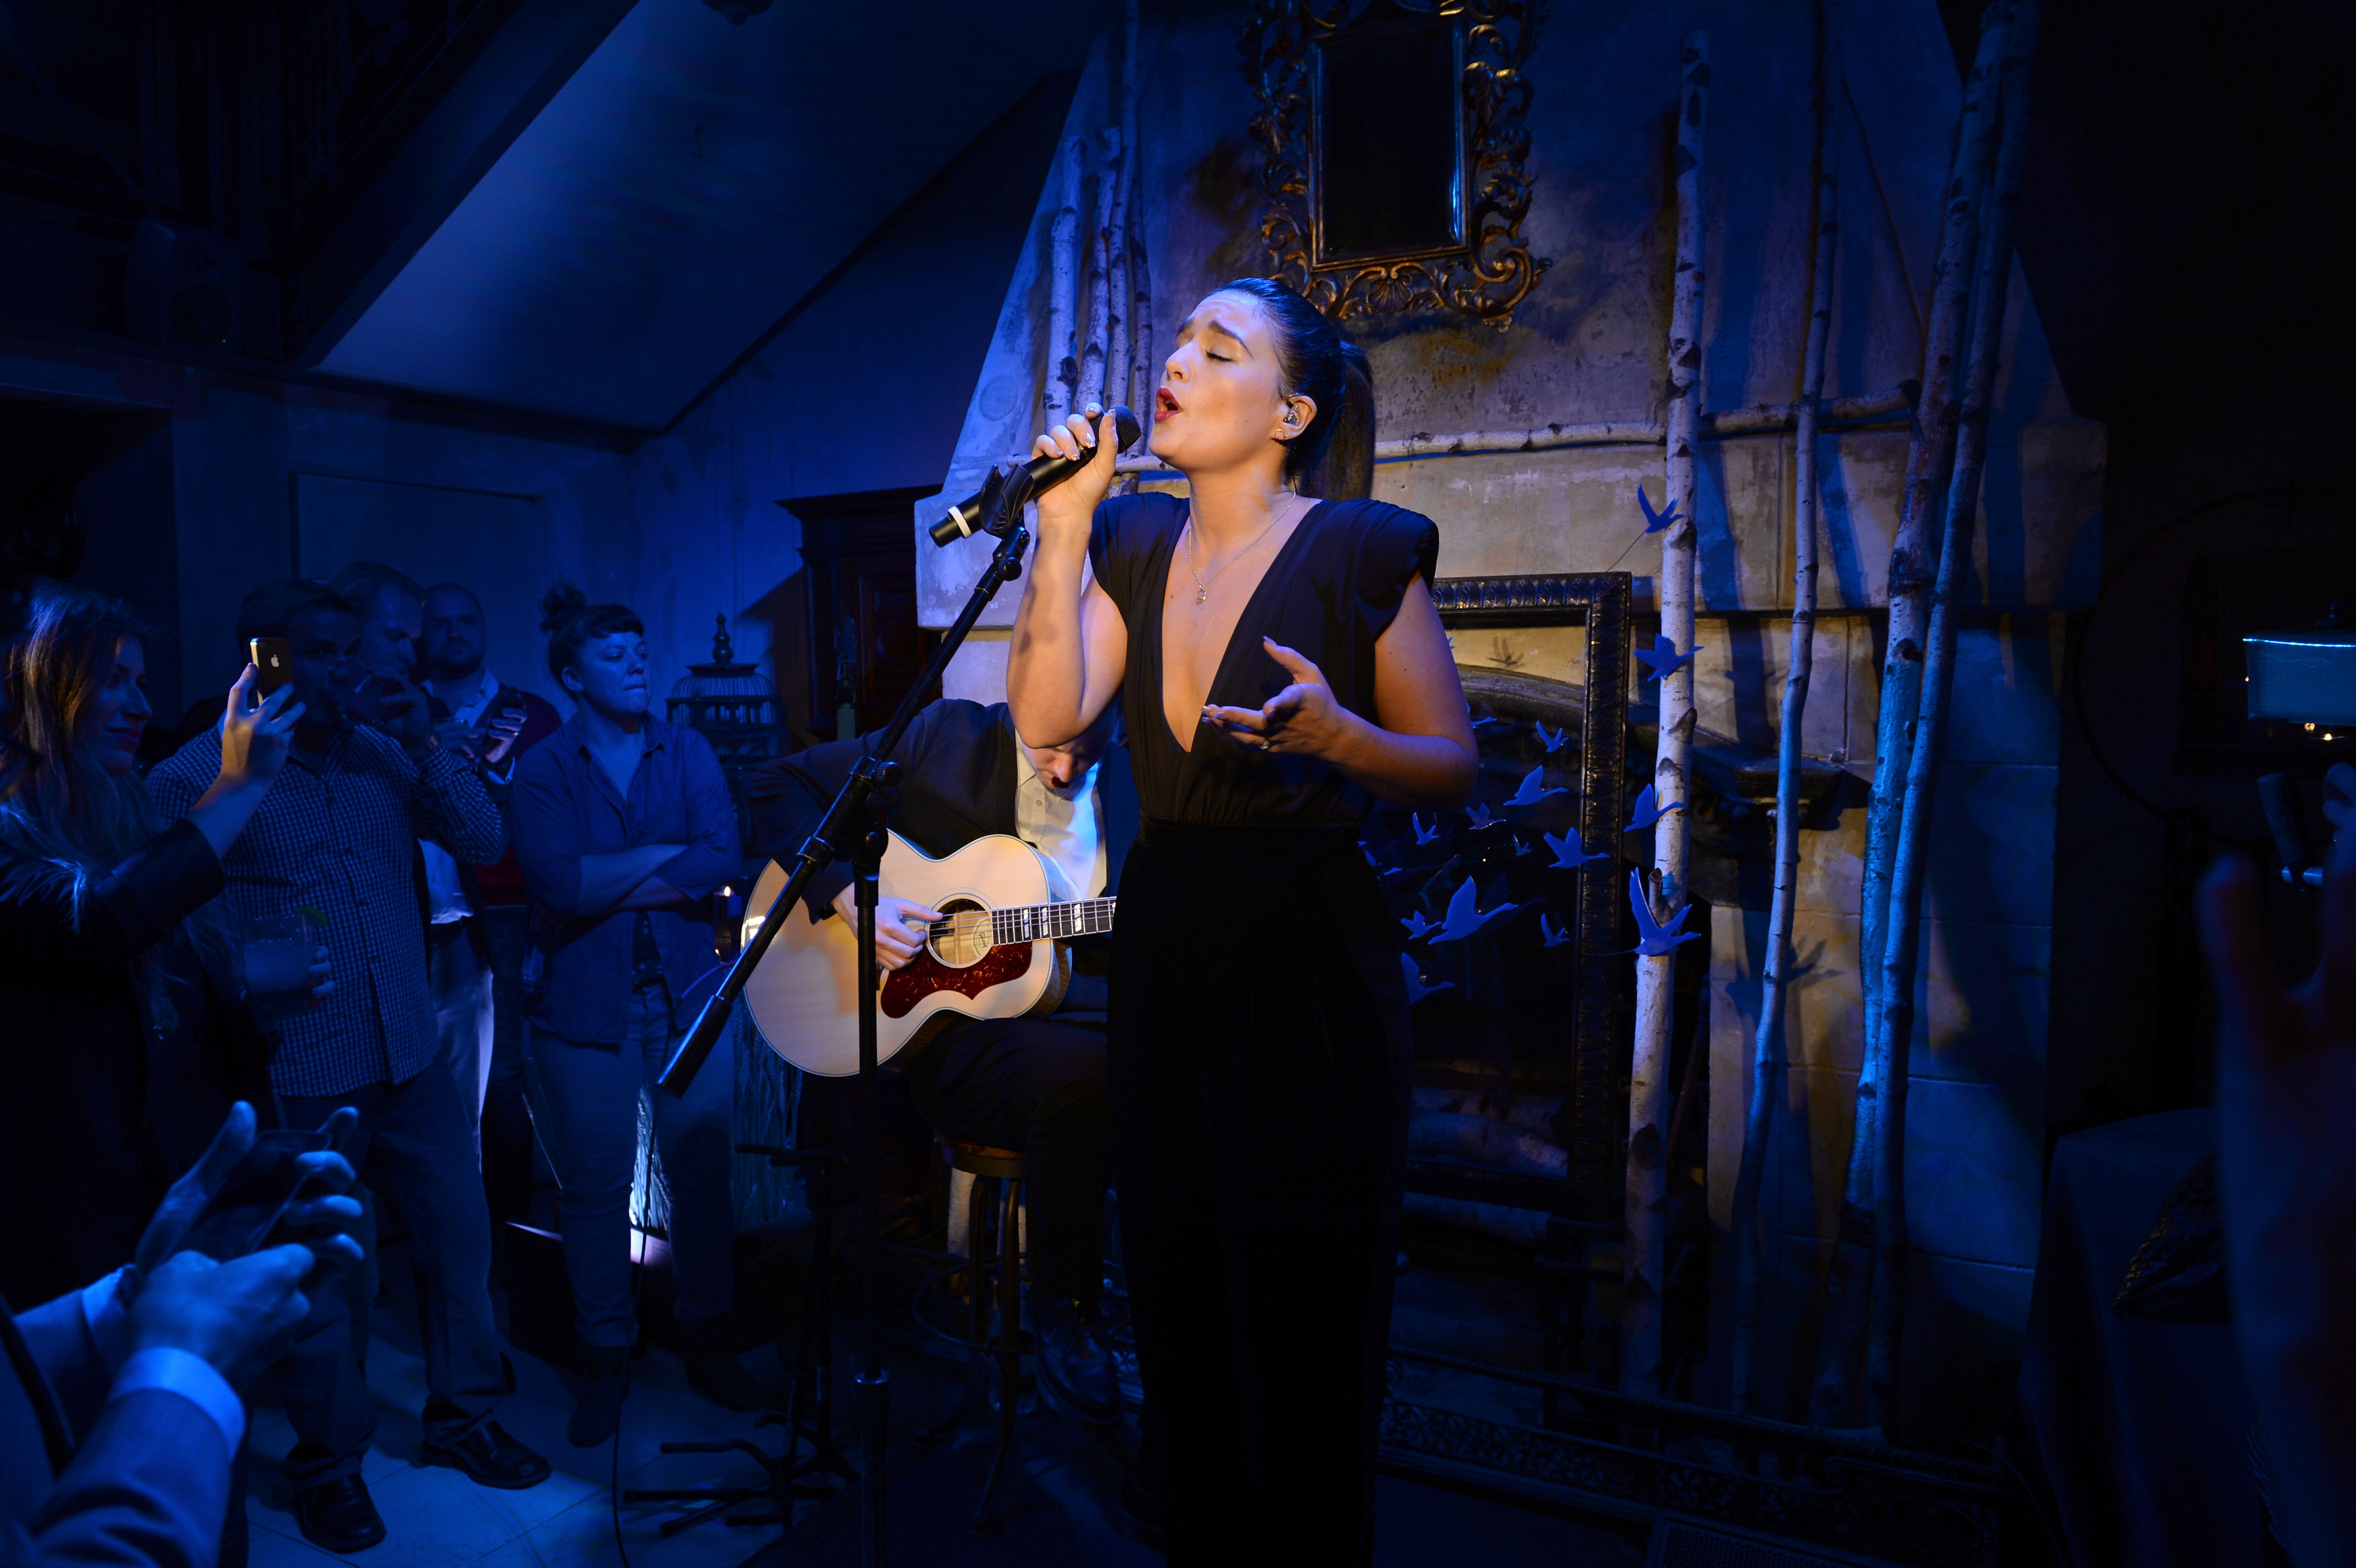 GREY GOOSE Vodka Hosts Exclusive Speakeasy With Special Performance By Jessie Ware - photo by Getty